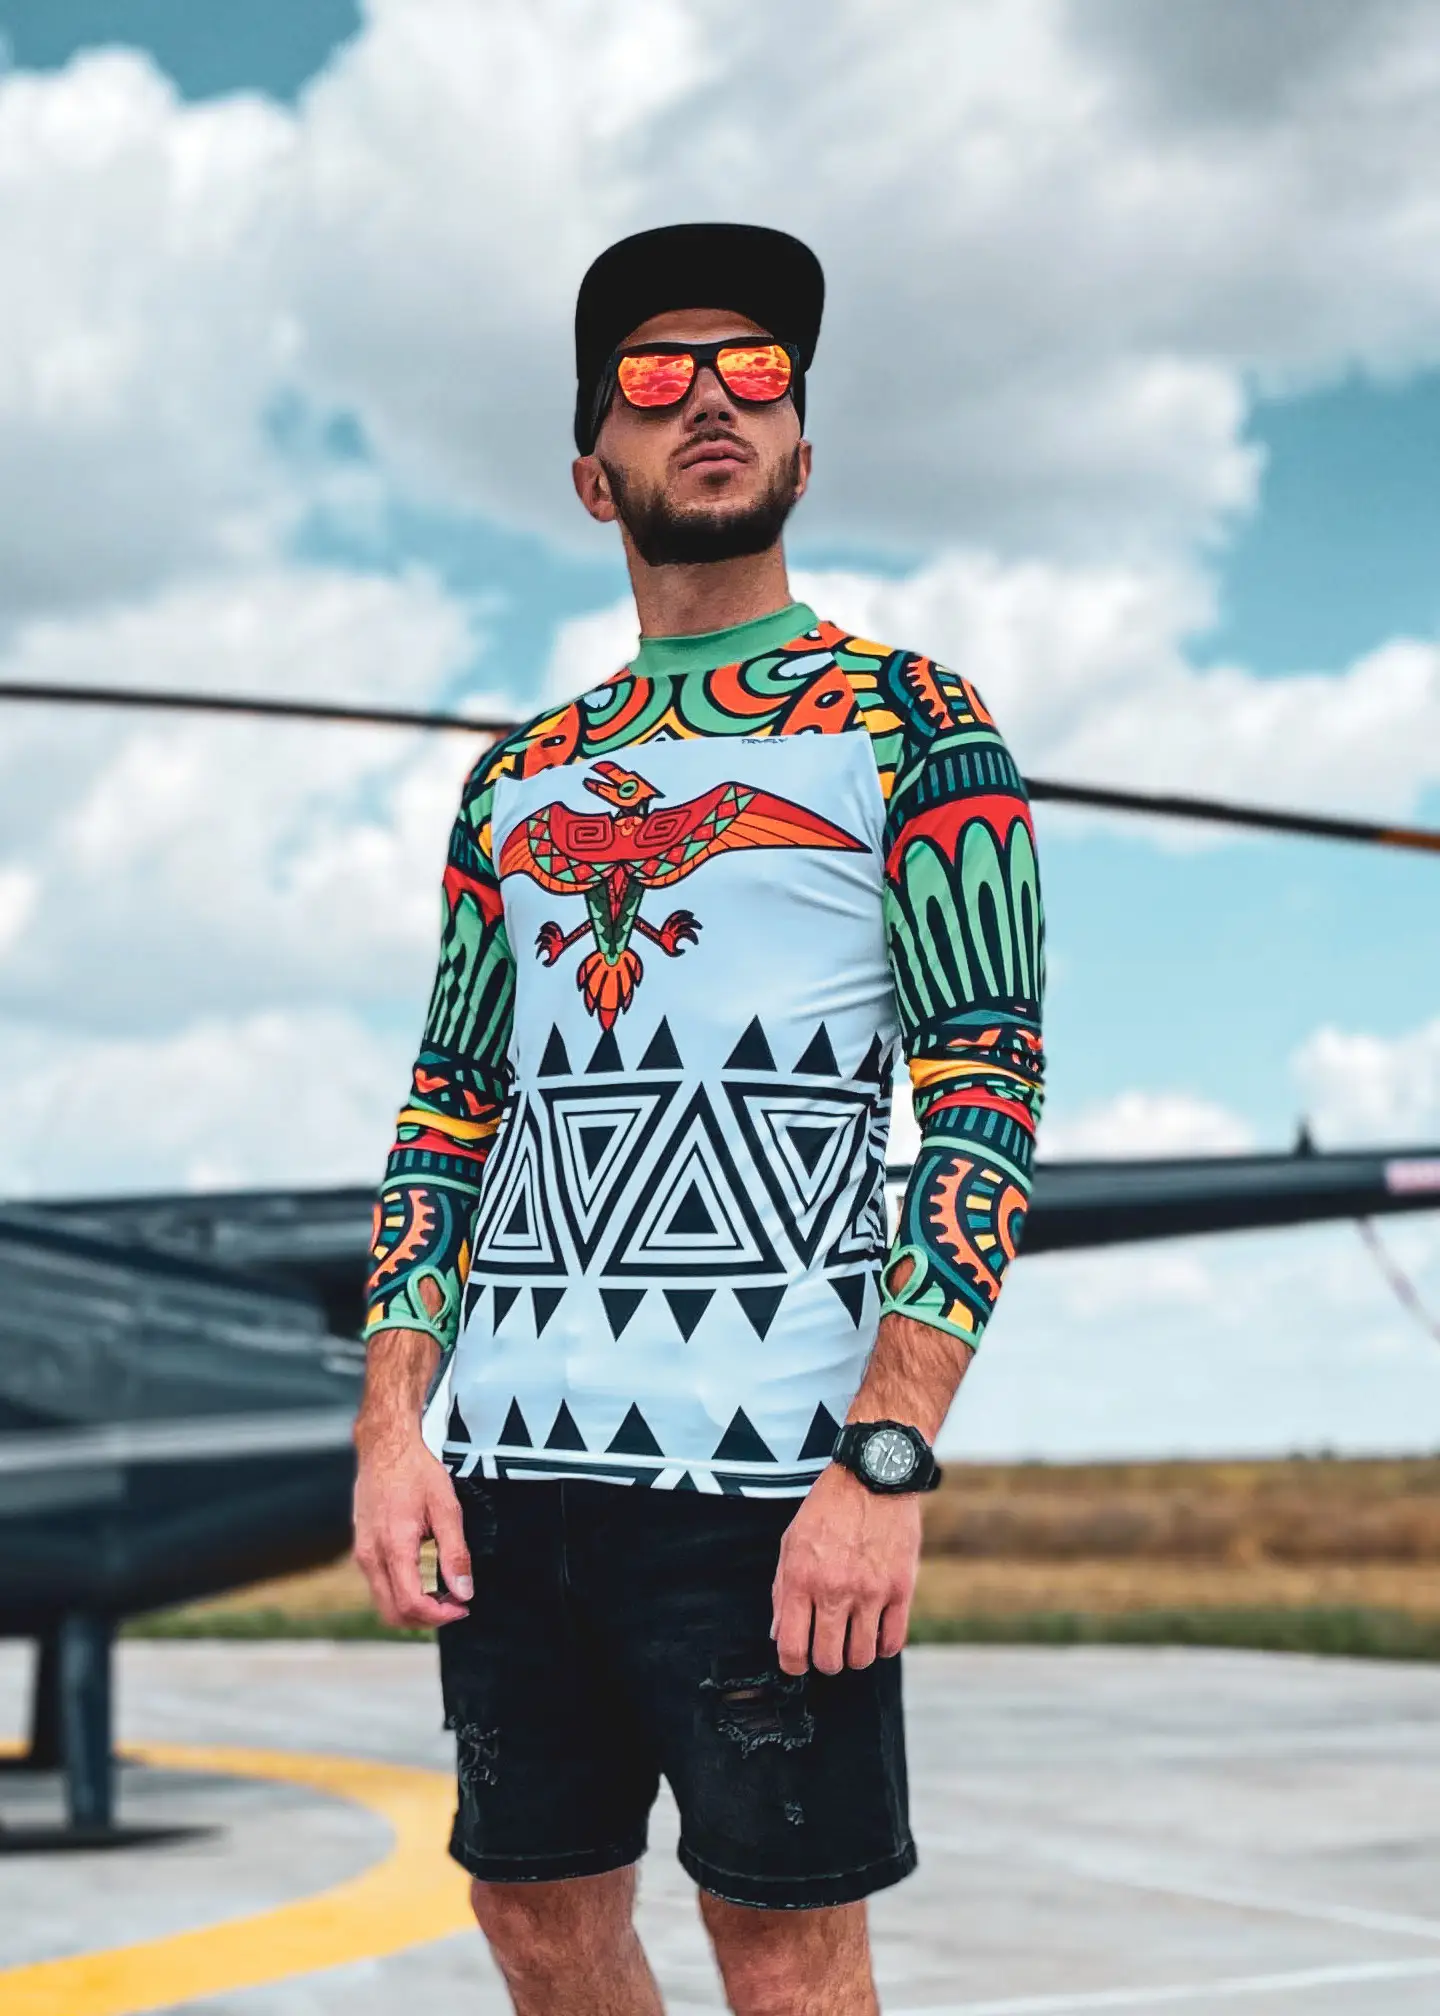 Paragliding Skydiving wear